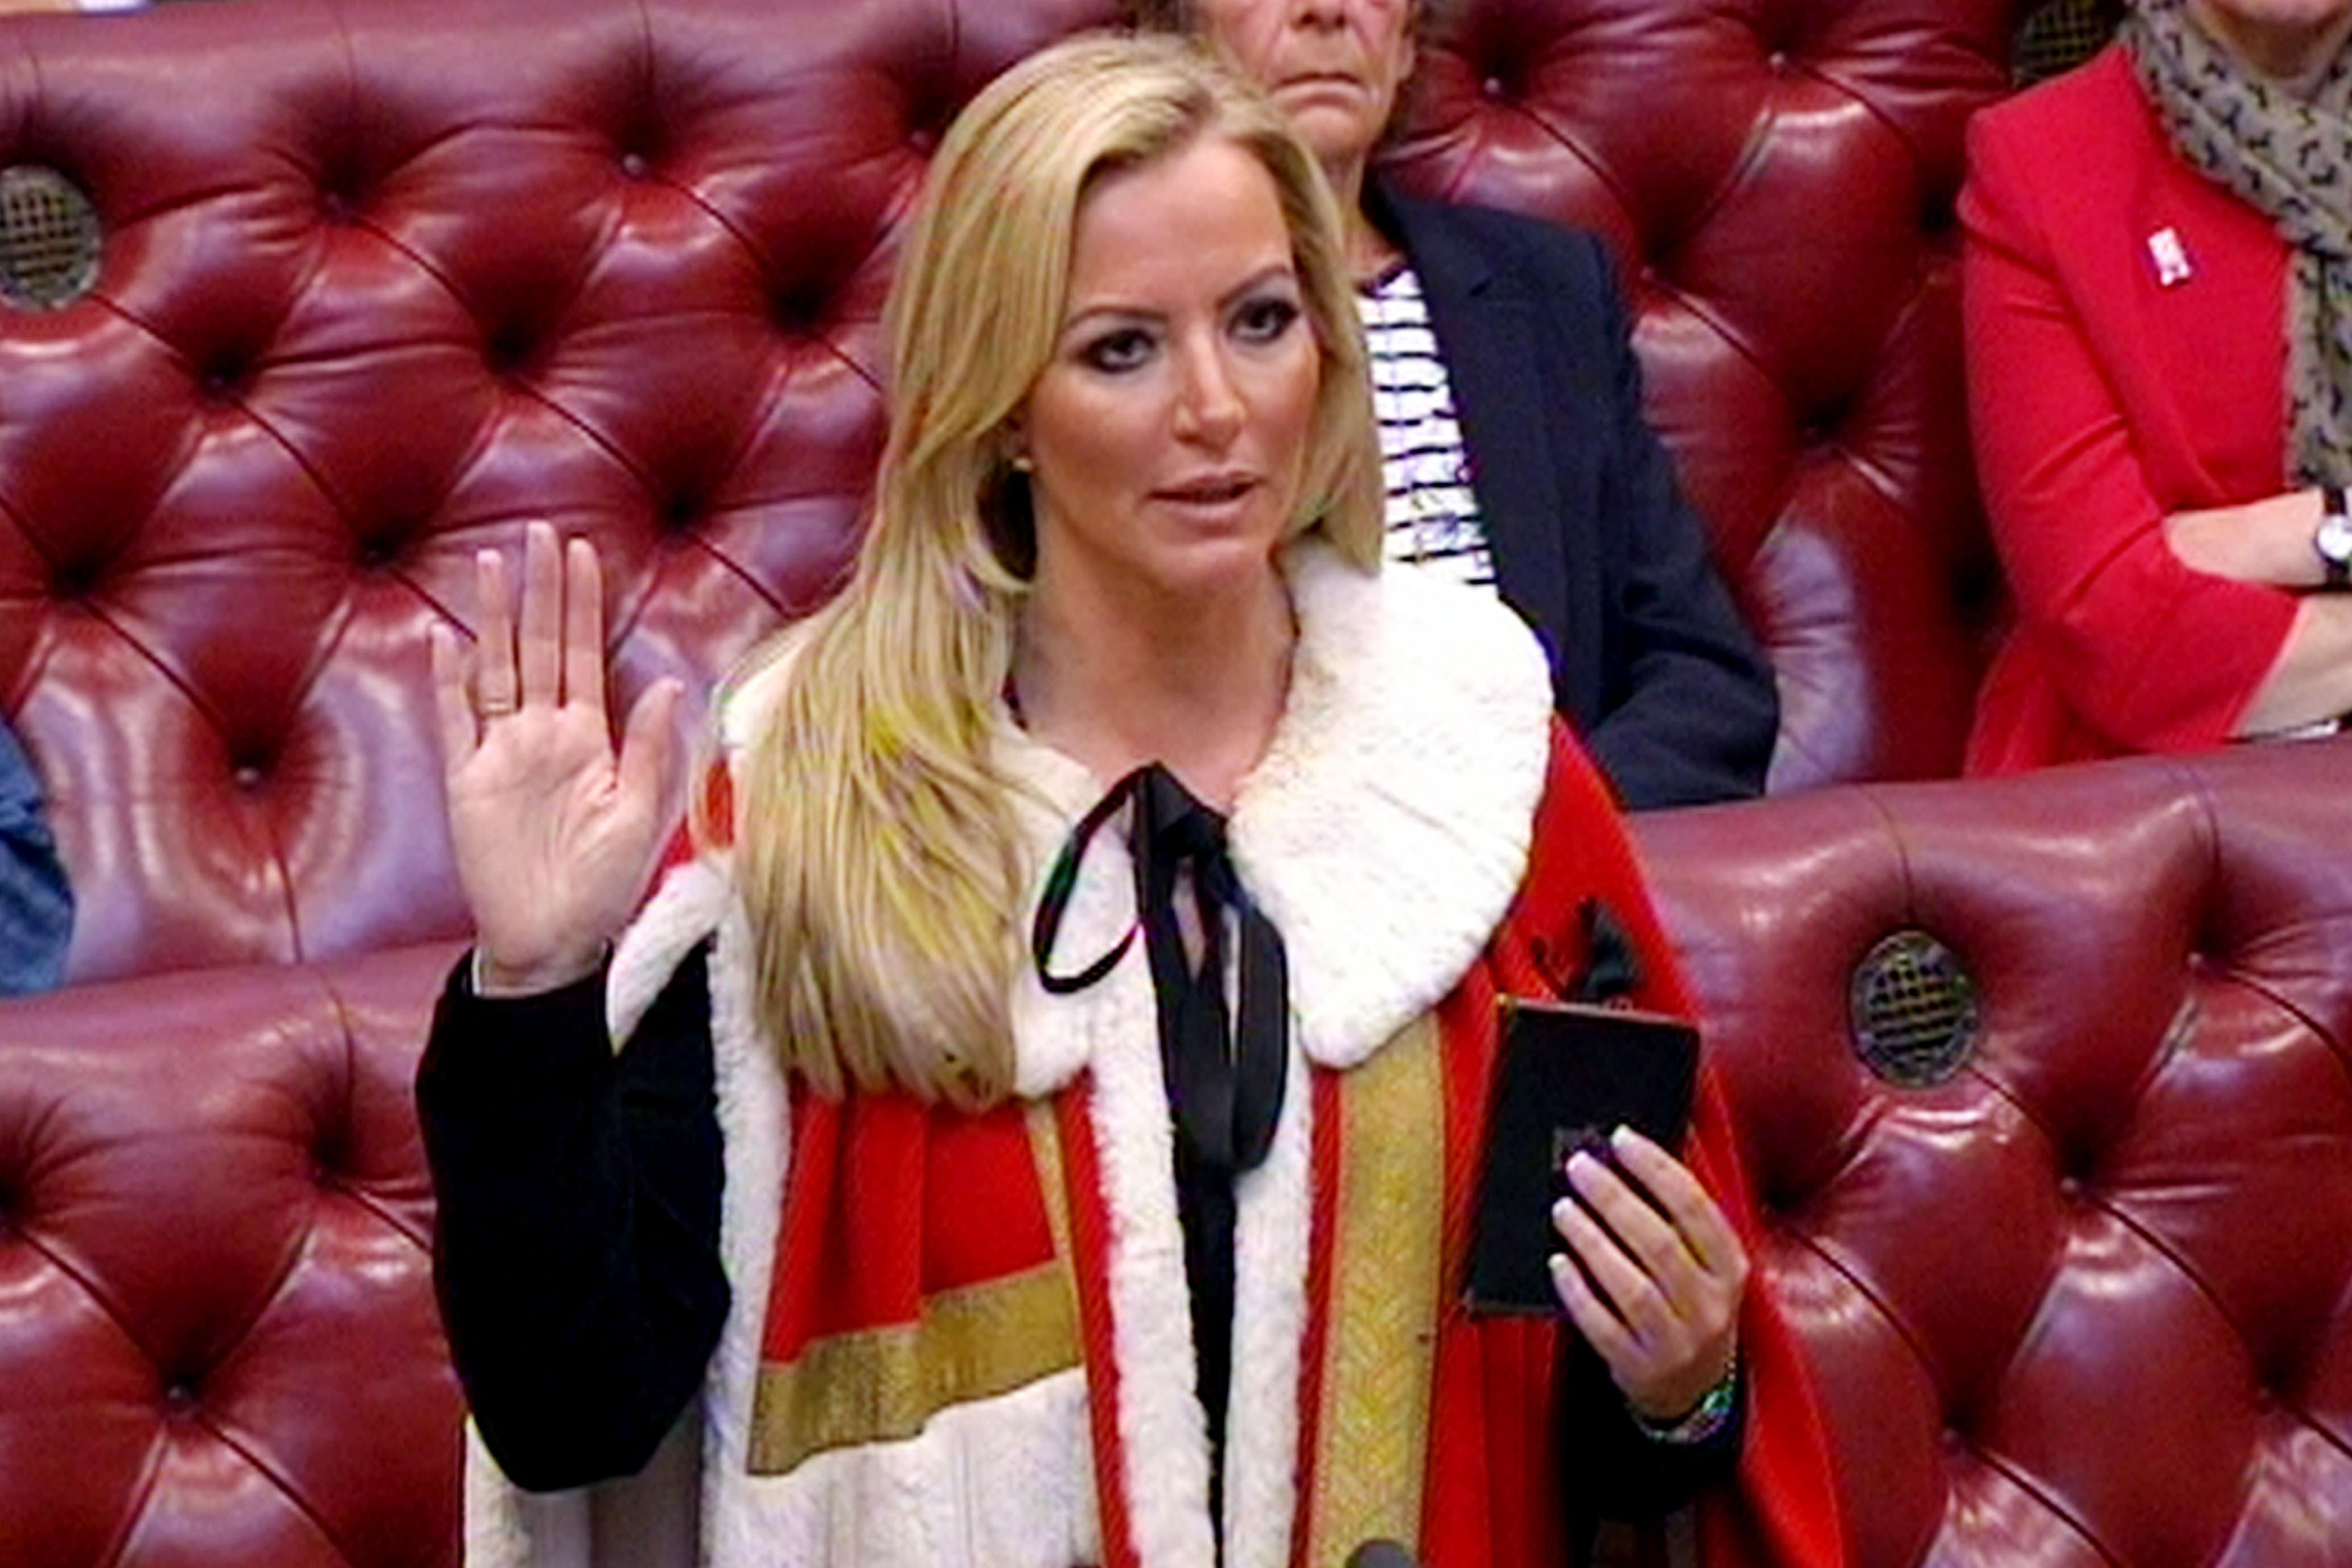 Entrepreneur Michelle Mone is admitted to the House of Lords as Baroness Mone of Mayfair, after being made a Tory peer.